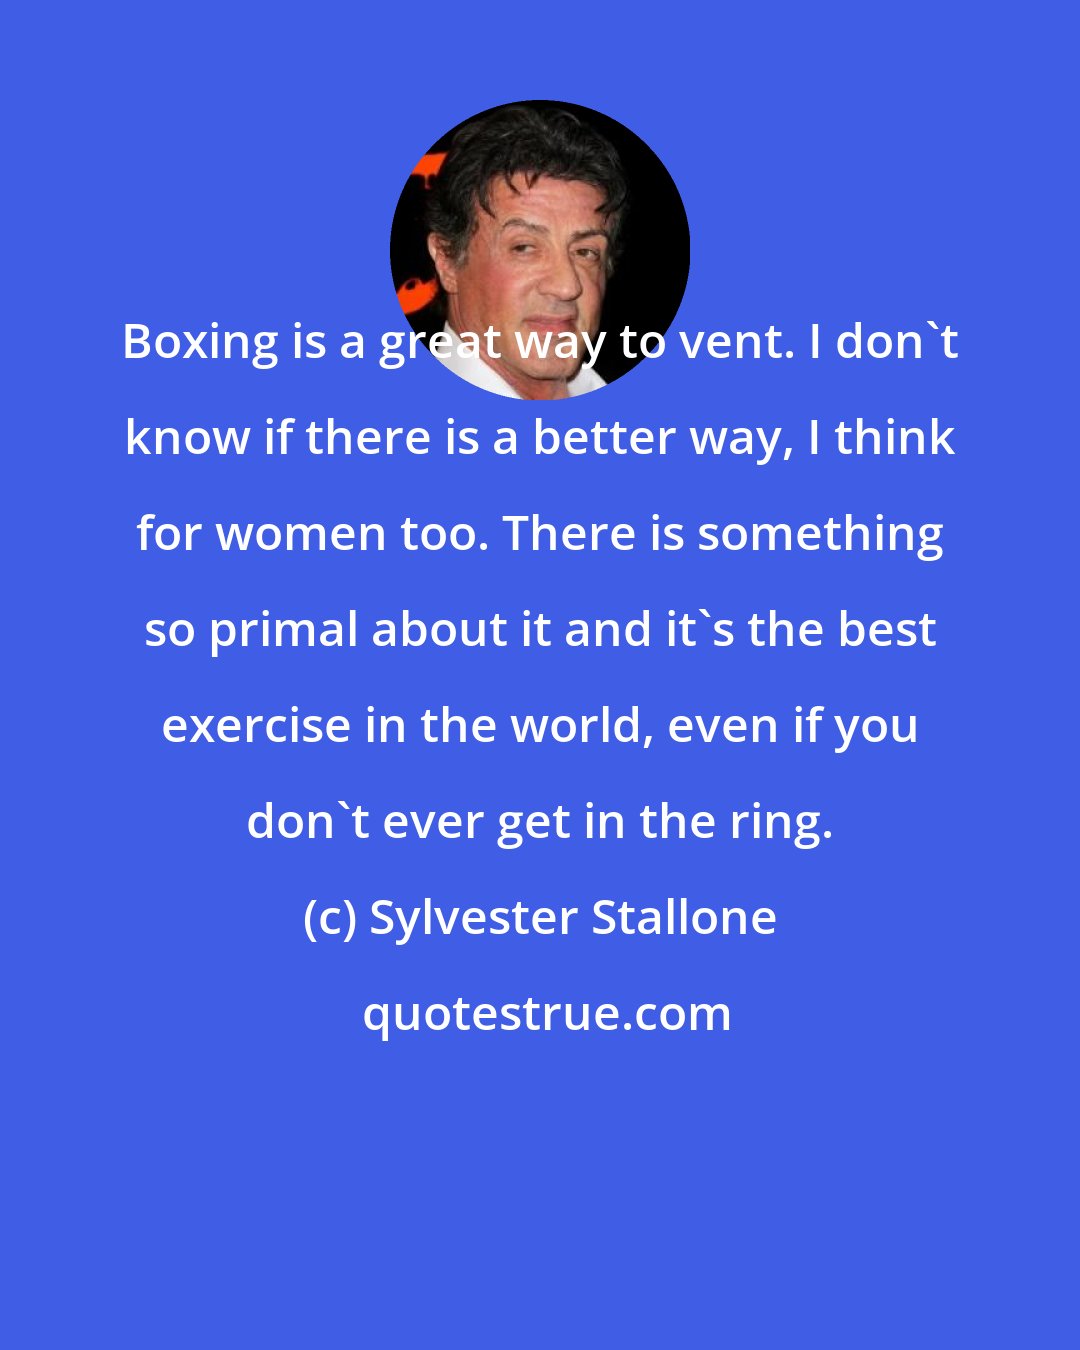 Sylvester Stallone: Boxing is a great way to vent. I don't know if there is a better way, I think for women too. There is something so primal about it and it's the best exercise in the world, even if you don't ever get in the ring.